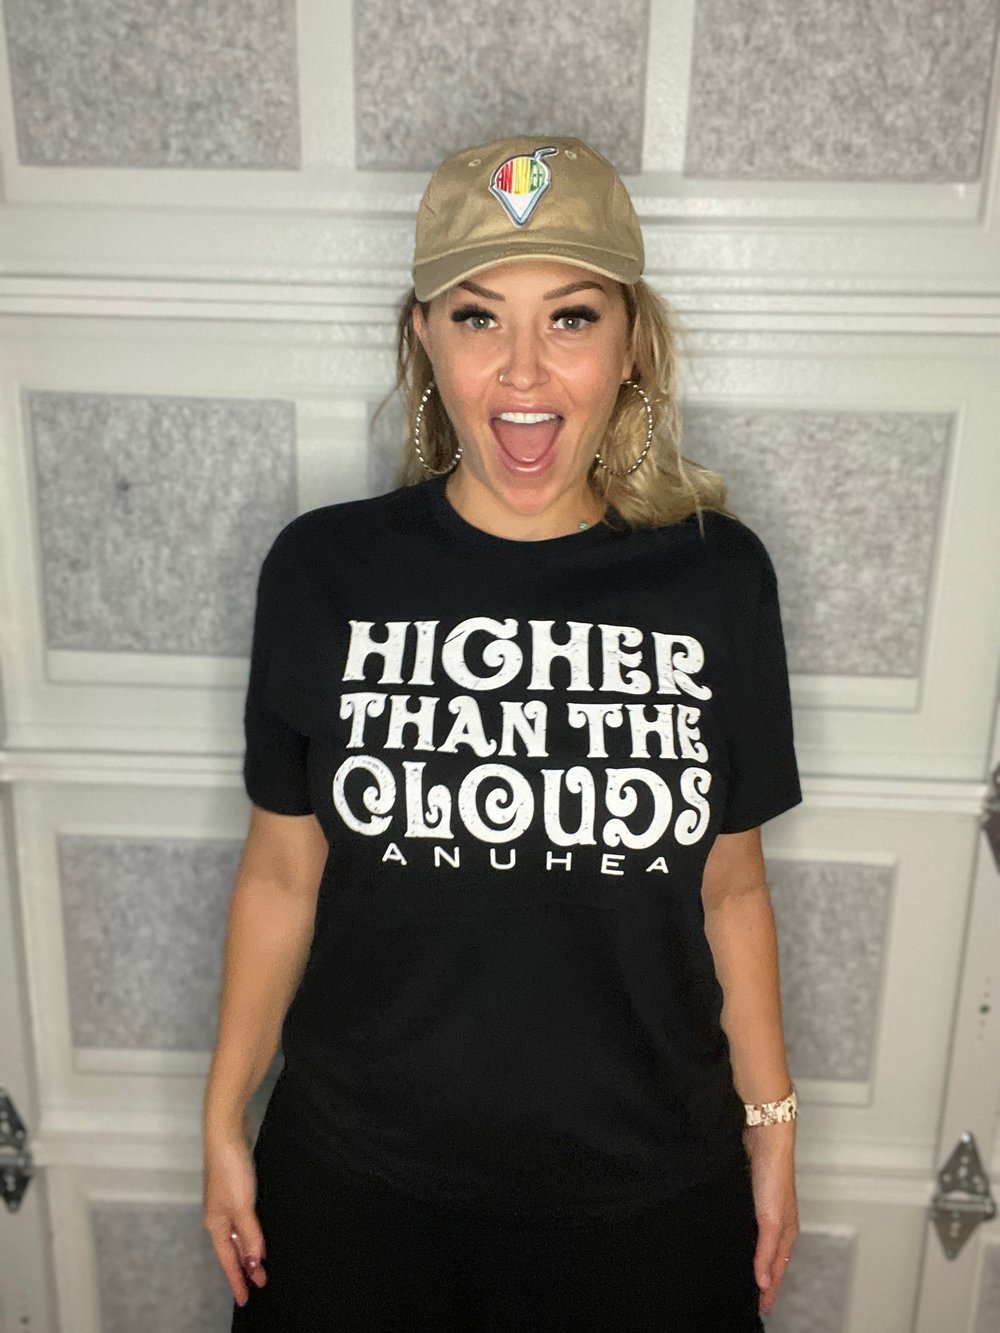 Higher Than the Clouds B&W Tee